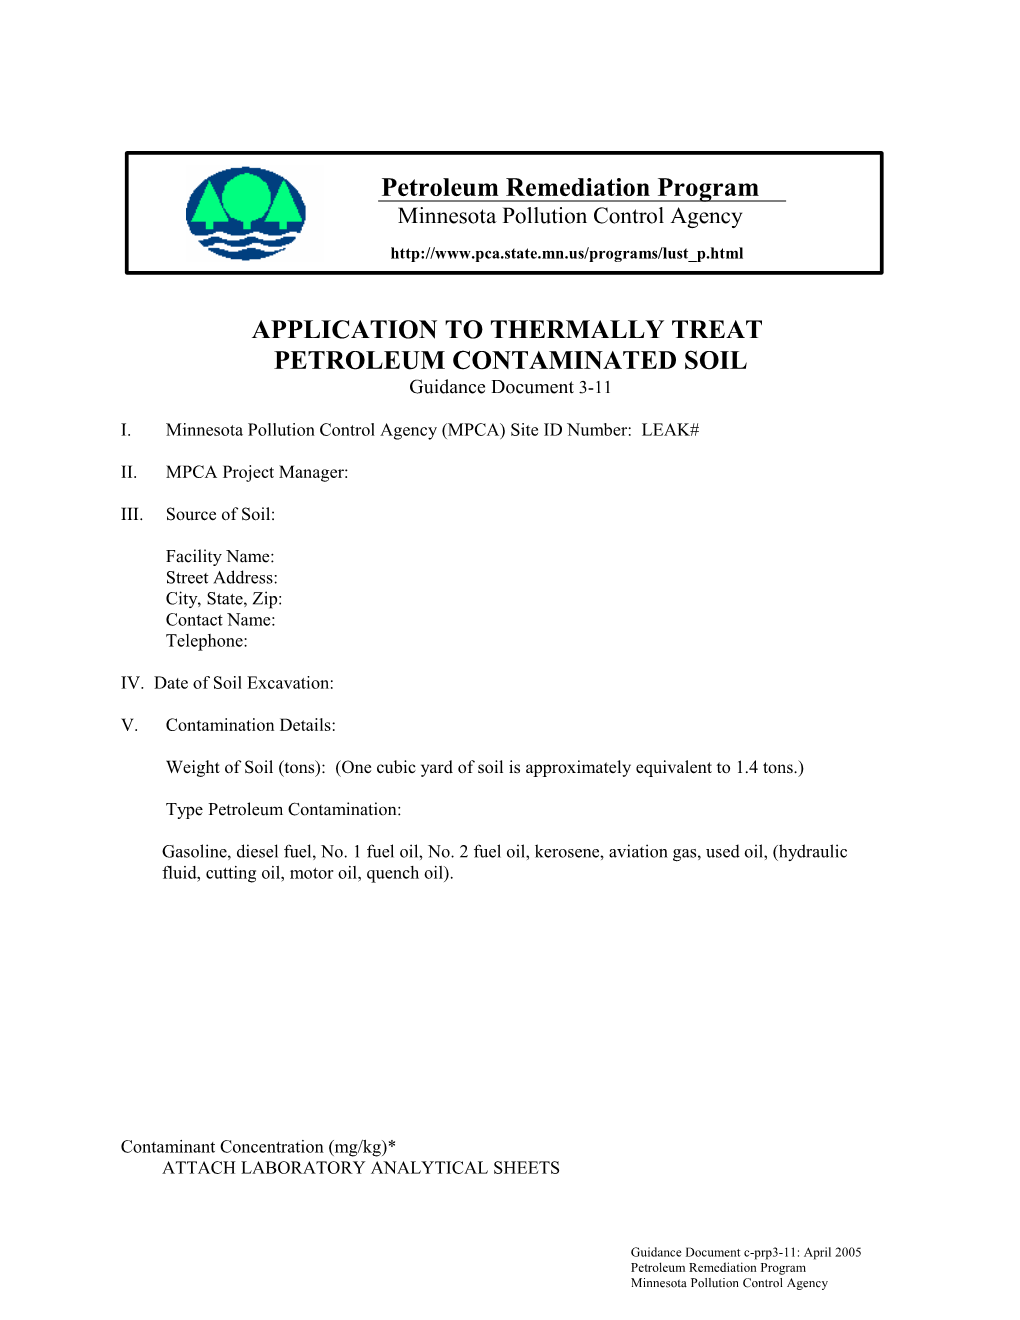 Application to Thermally Treat Petroleum Contaminated Soil